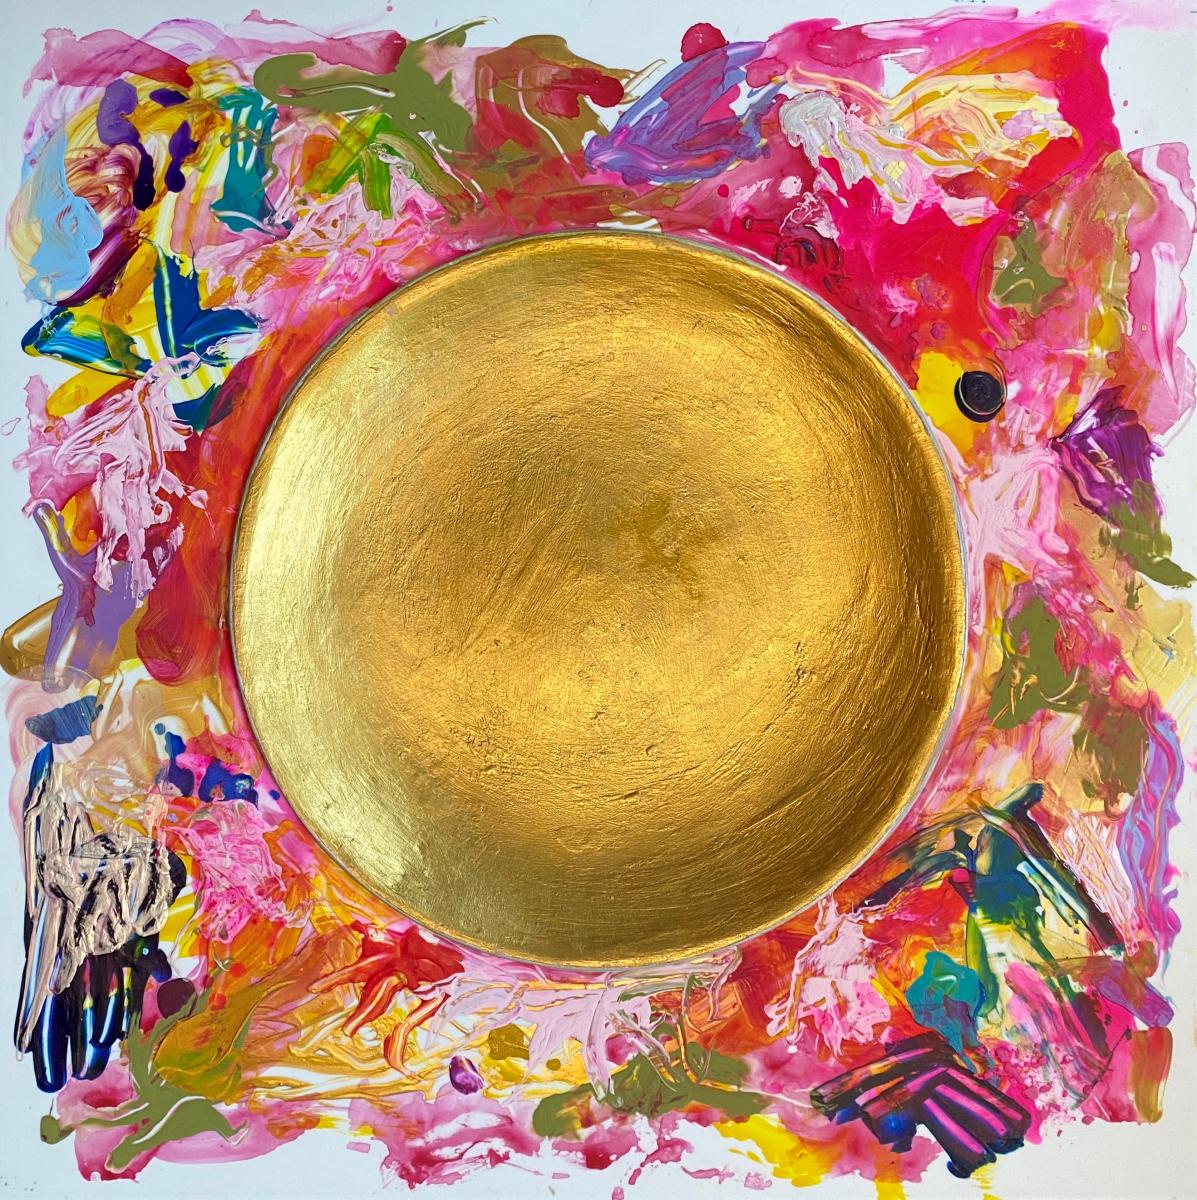 "The Gold Host" | 2020 | Tempera, acrylics and metallics on plexi with drip tray | 36" X 36" in artist's frame.